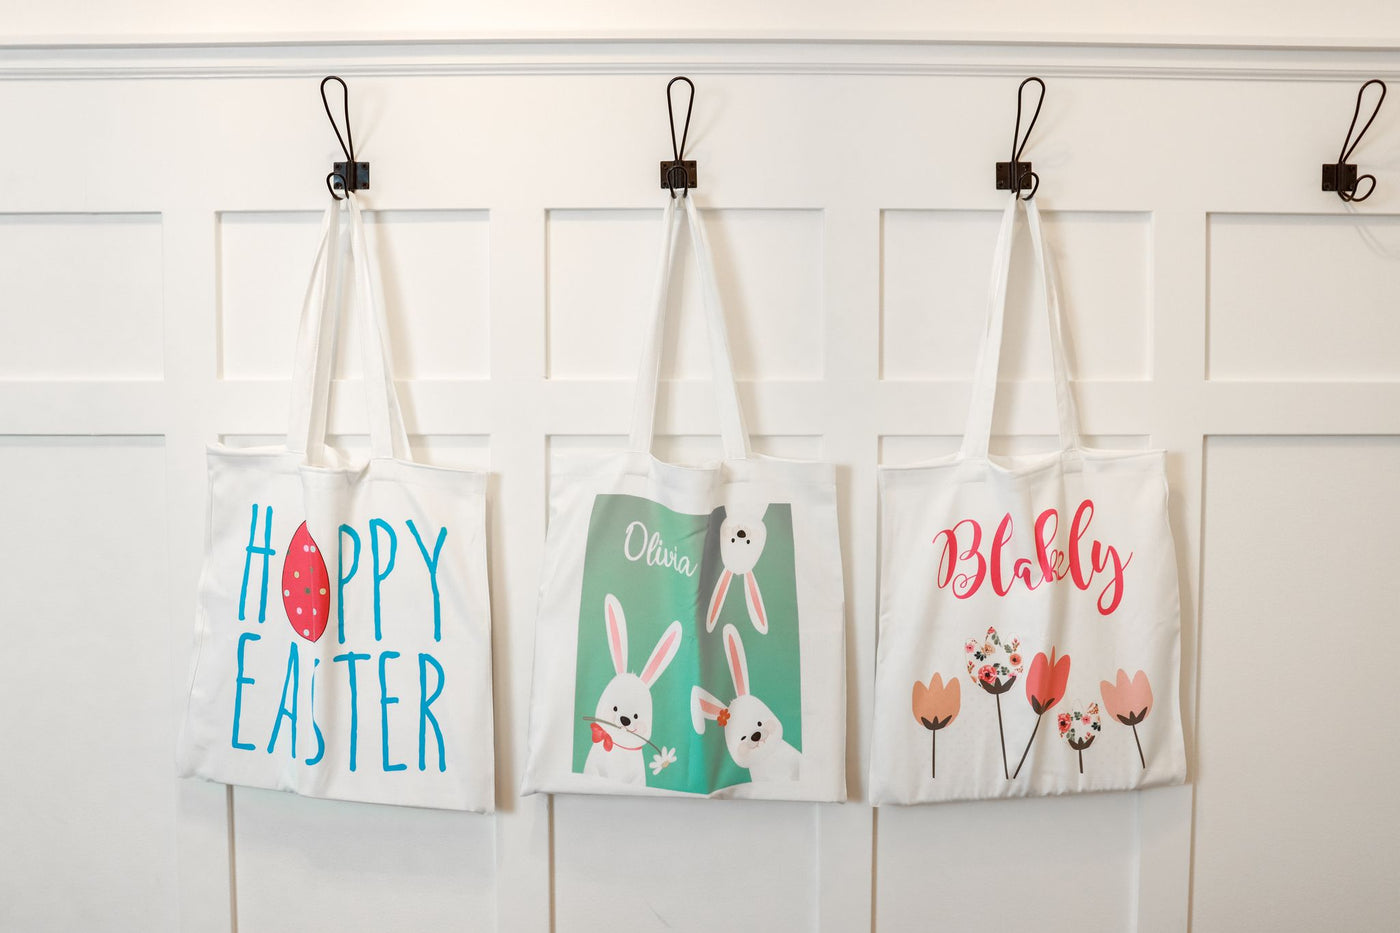 Featured Product! Easter Totes